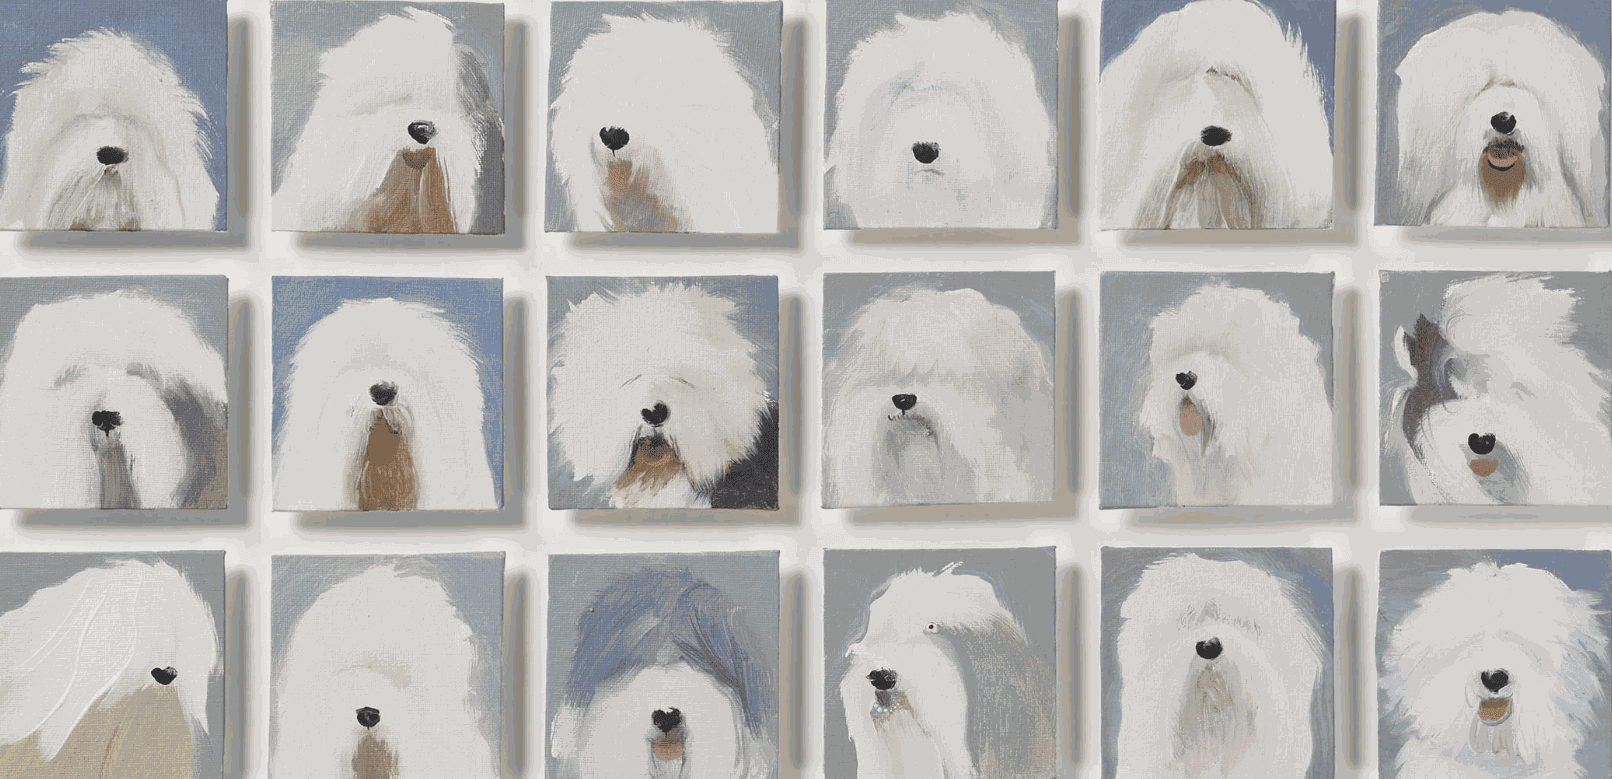 Holly Frean - Thirty Six Old English Sheepdogs